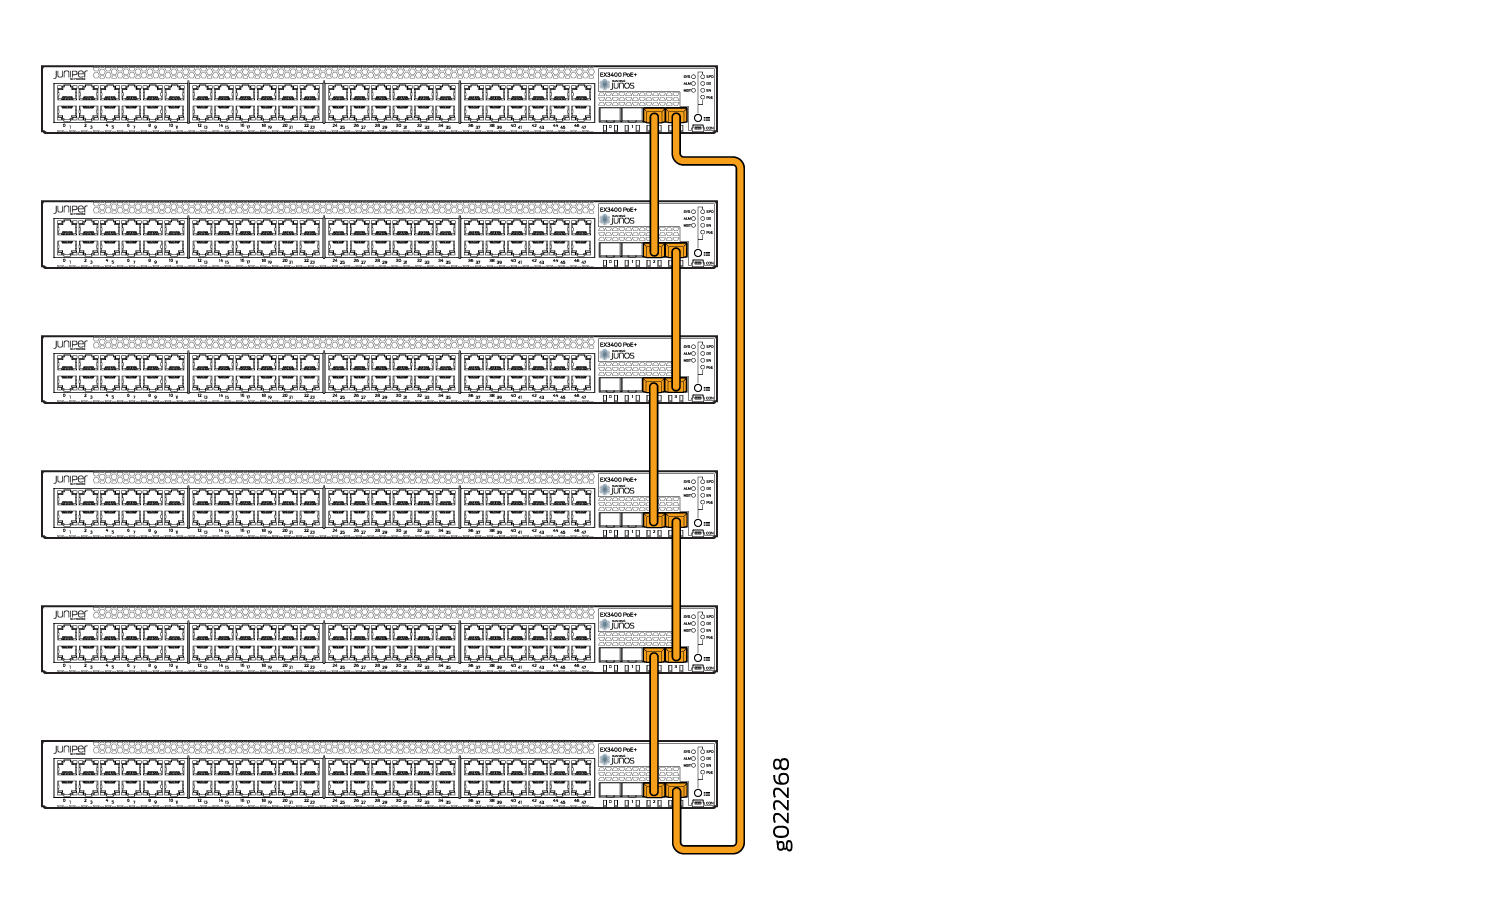 EX3400 Switches Mounted on a Single Rack and Connected in a Ring Topology: Example 2